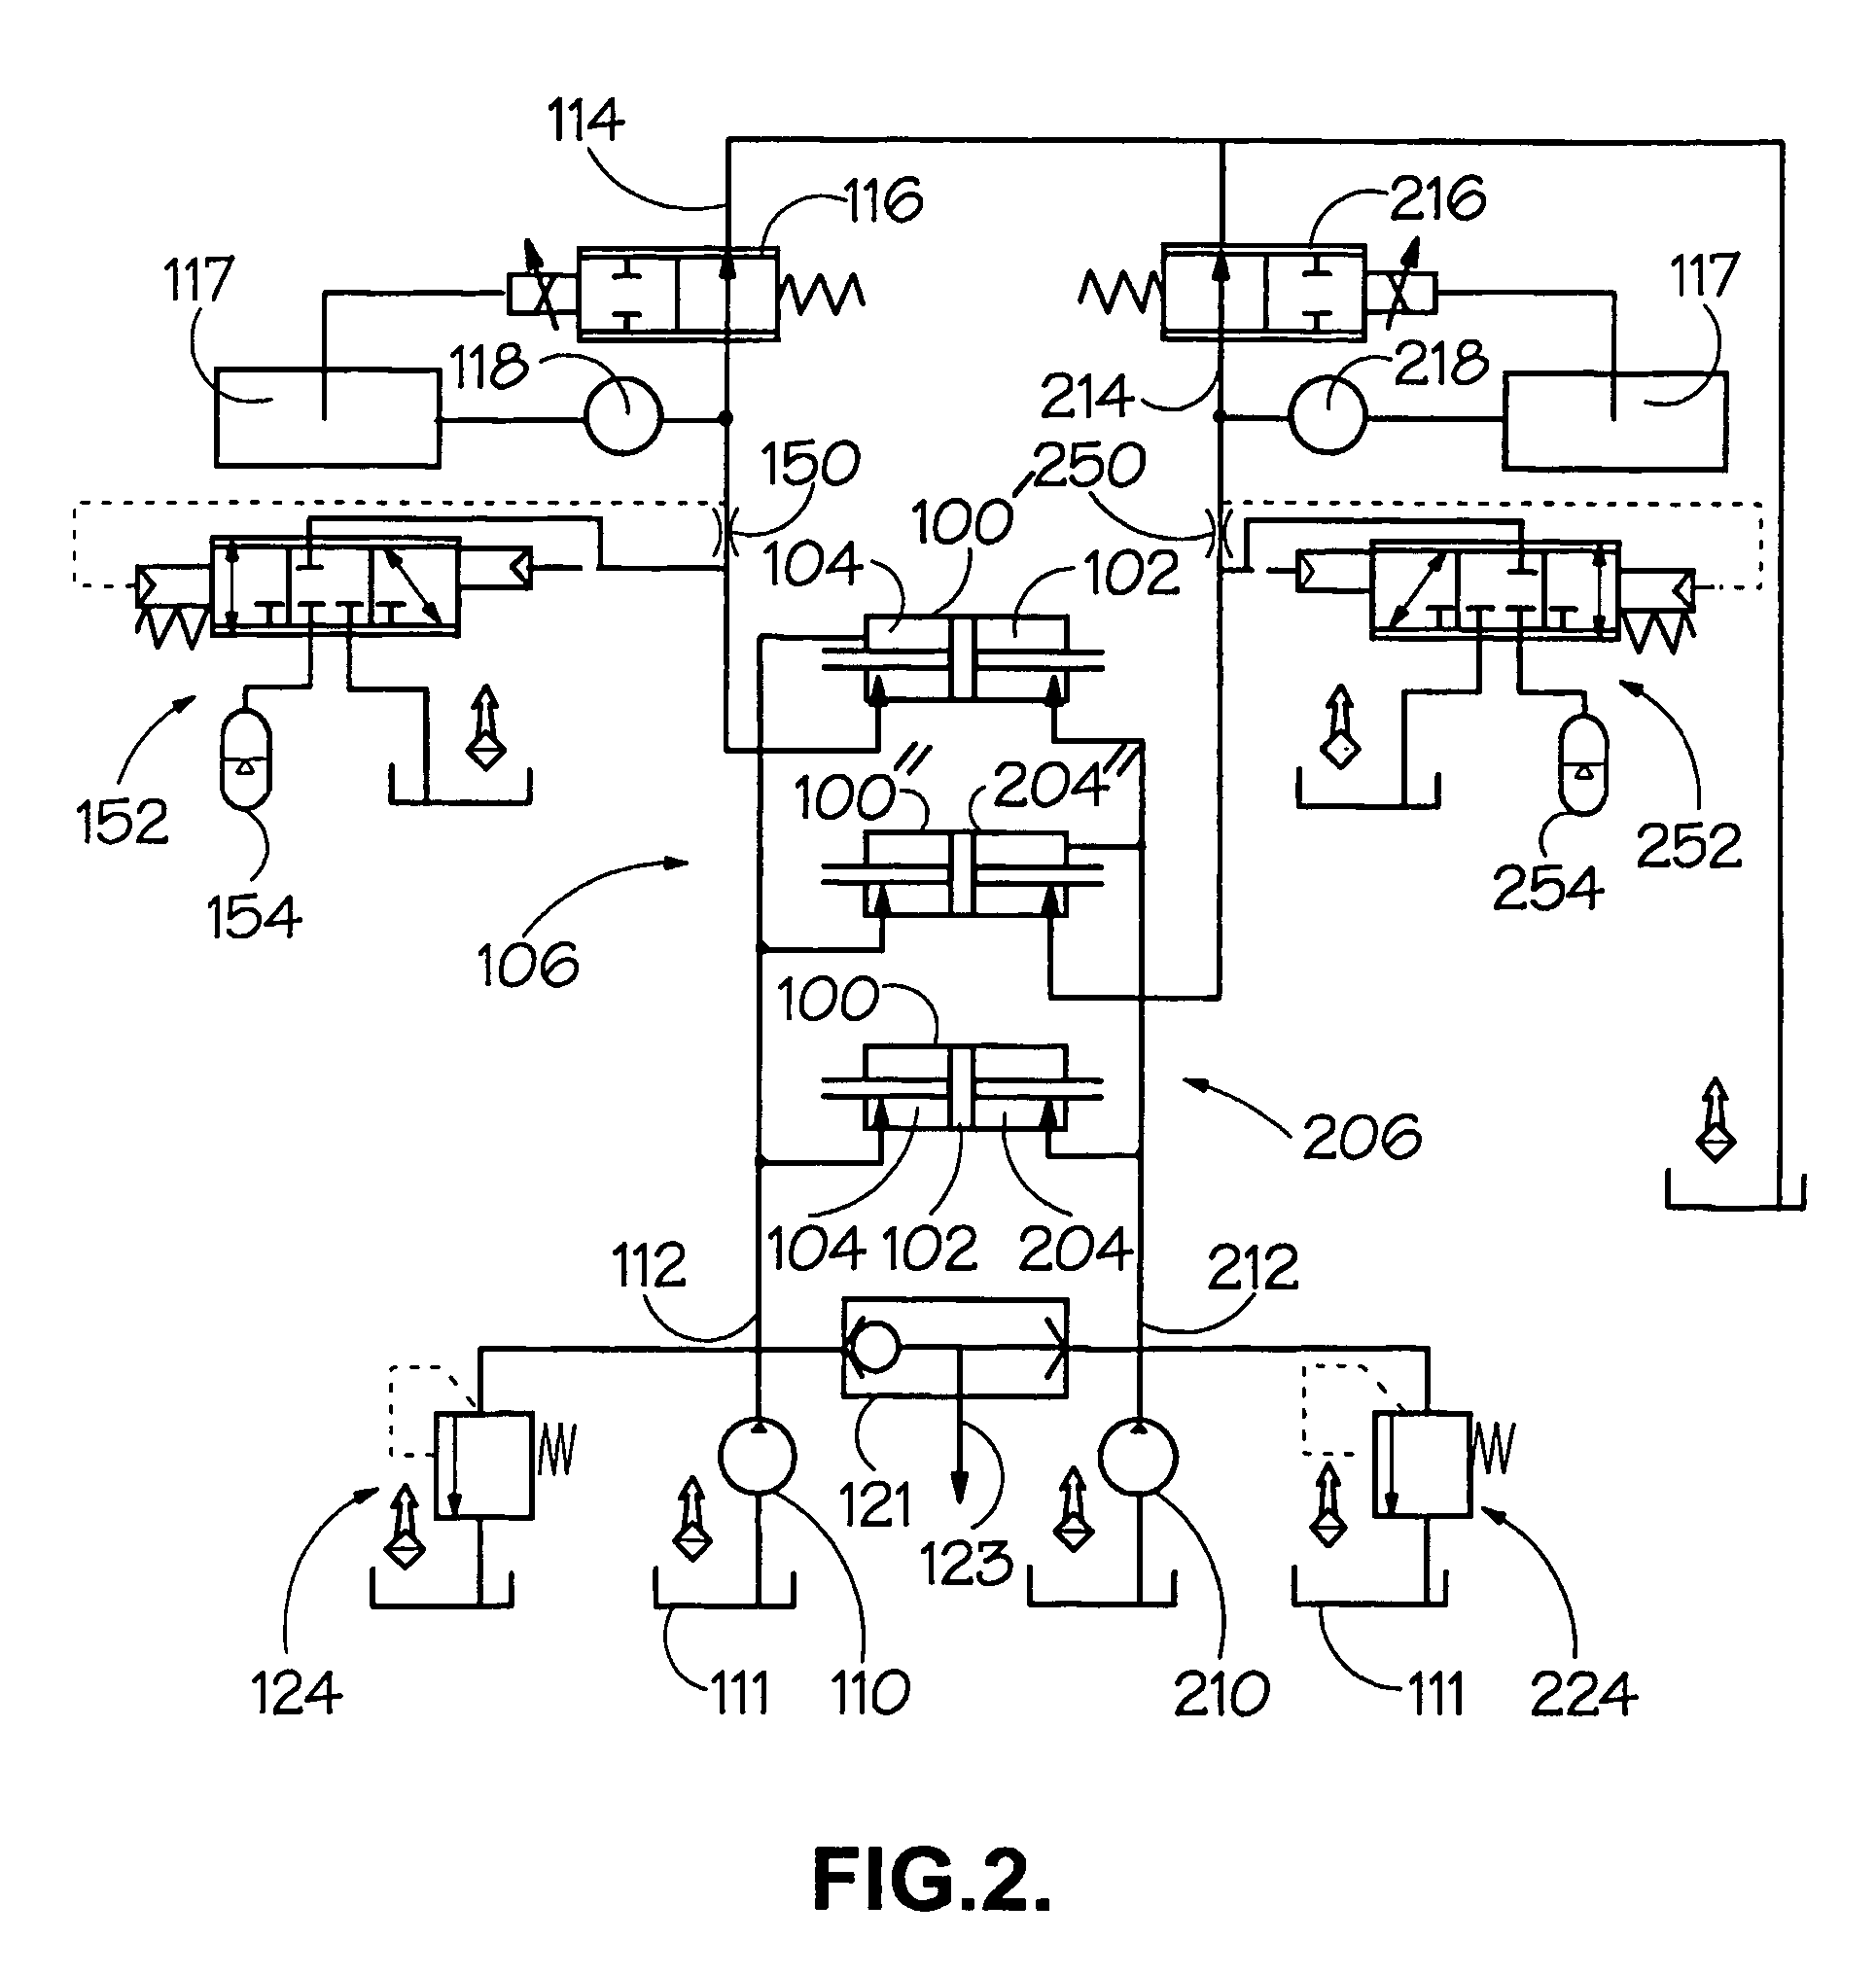 Hydraulic control circuit for a continuously variable transmission